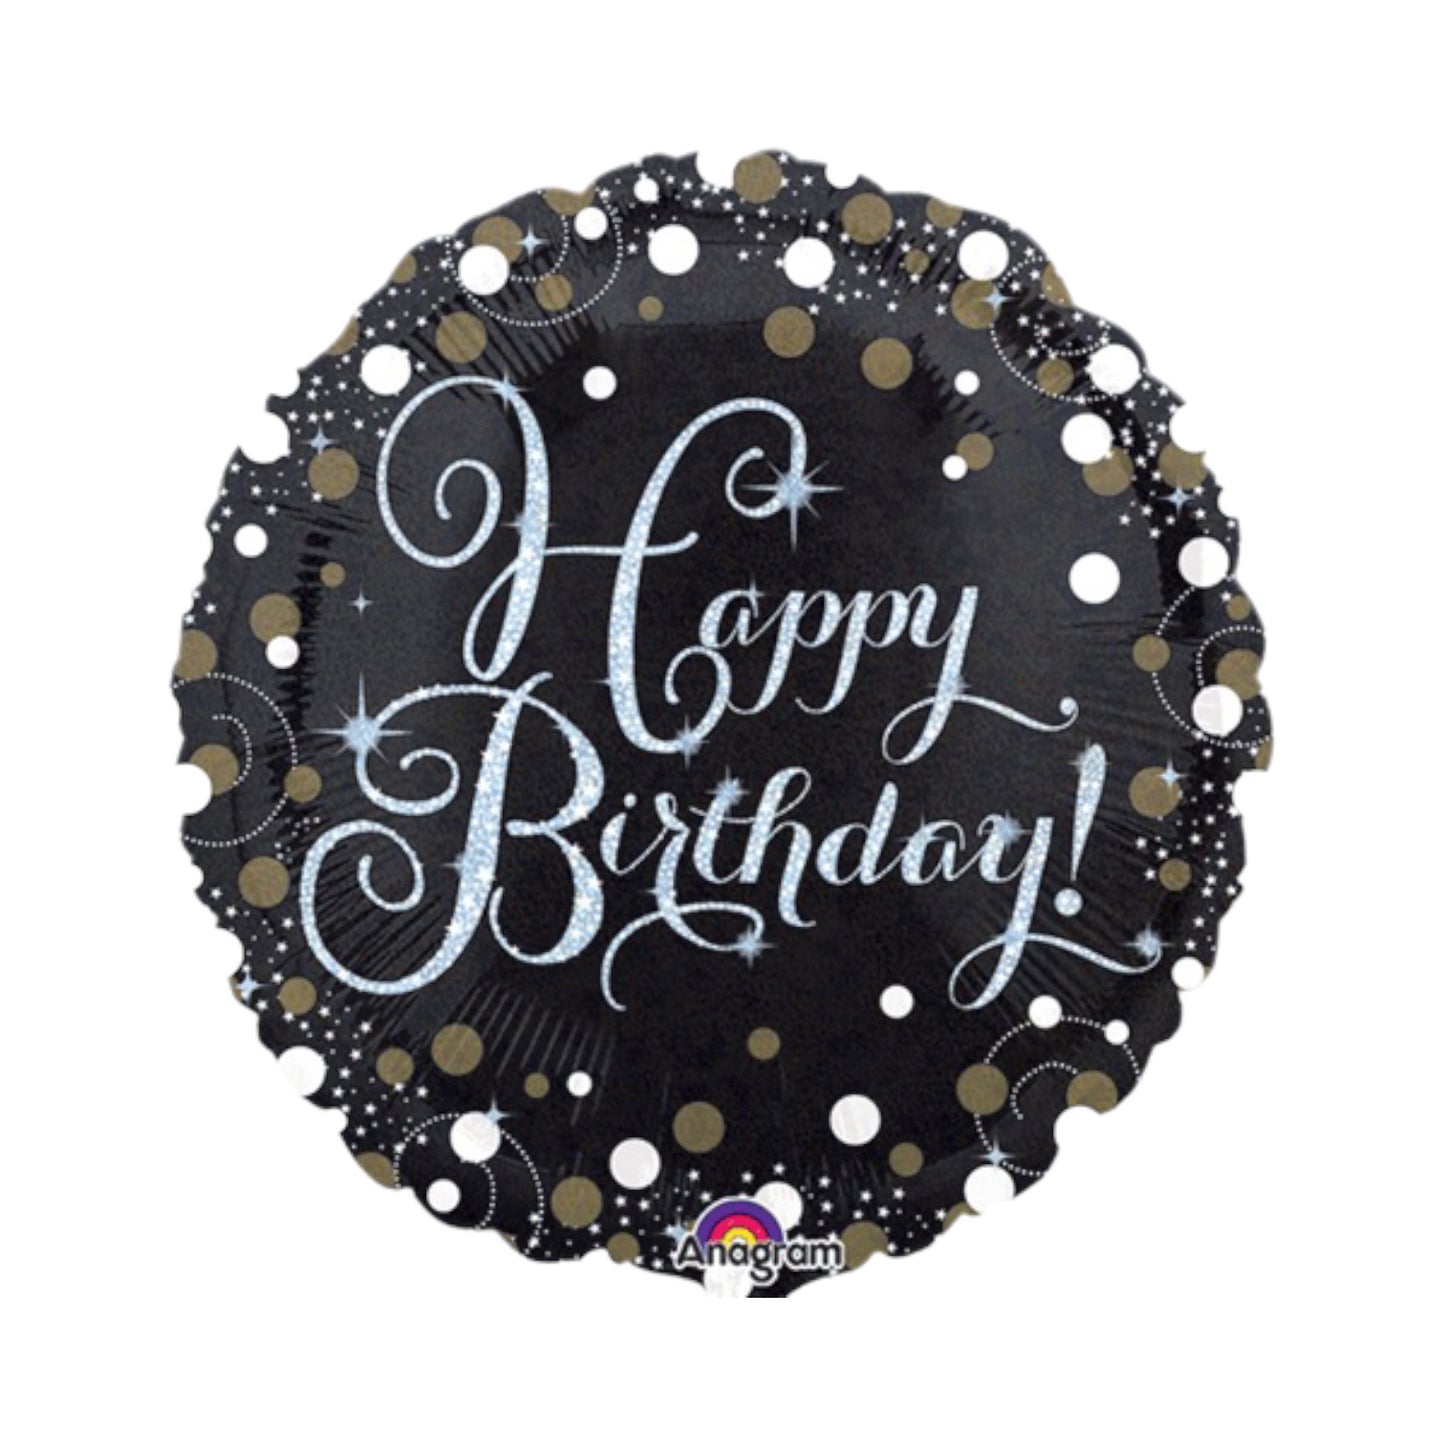 Happy Birthday Balloon - Black BG, Silver Letters and Bronze Dots.